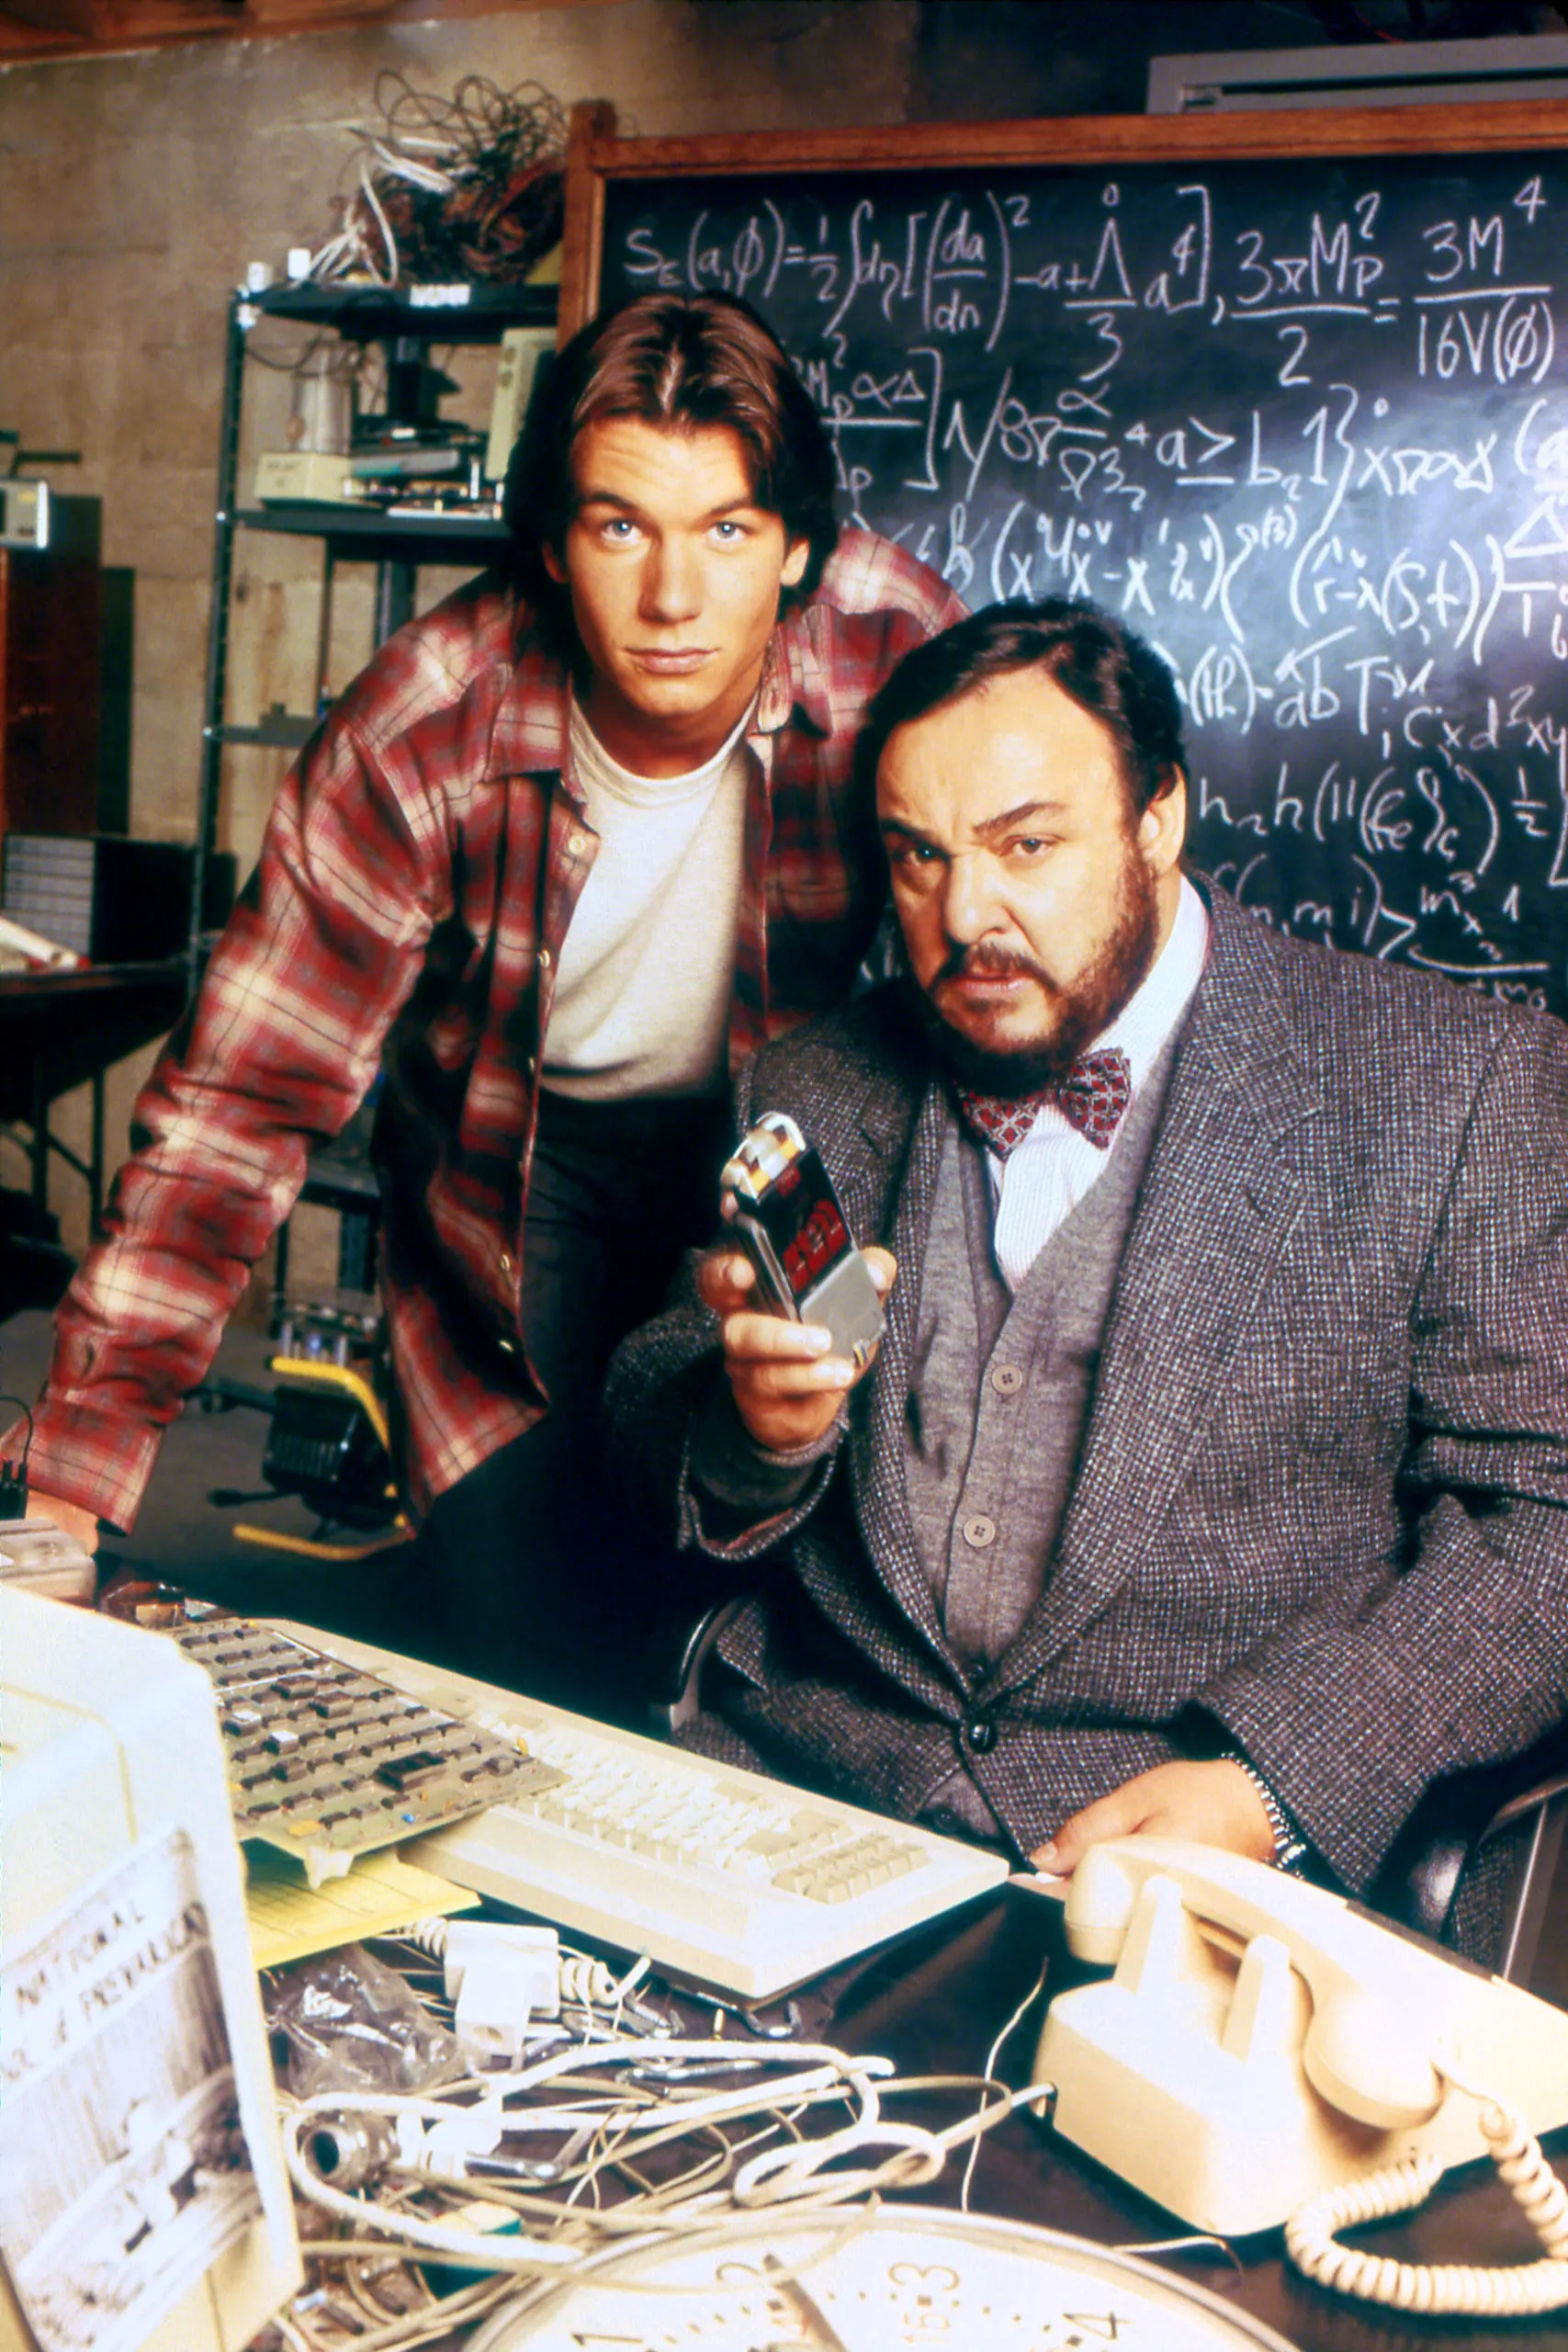 Sliders Season One Pilot Episode Promo Photo with Jerry O'Connell and John Rhys-Davies